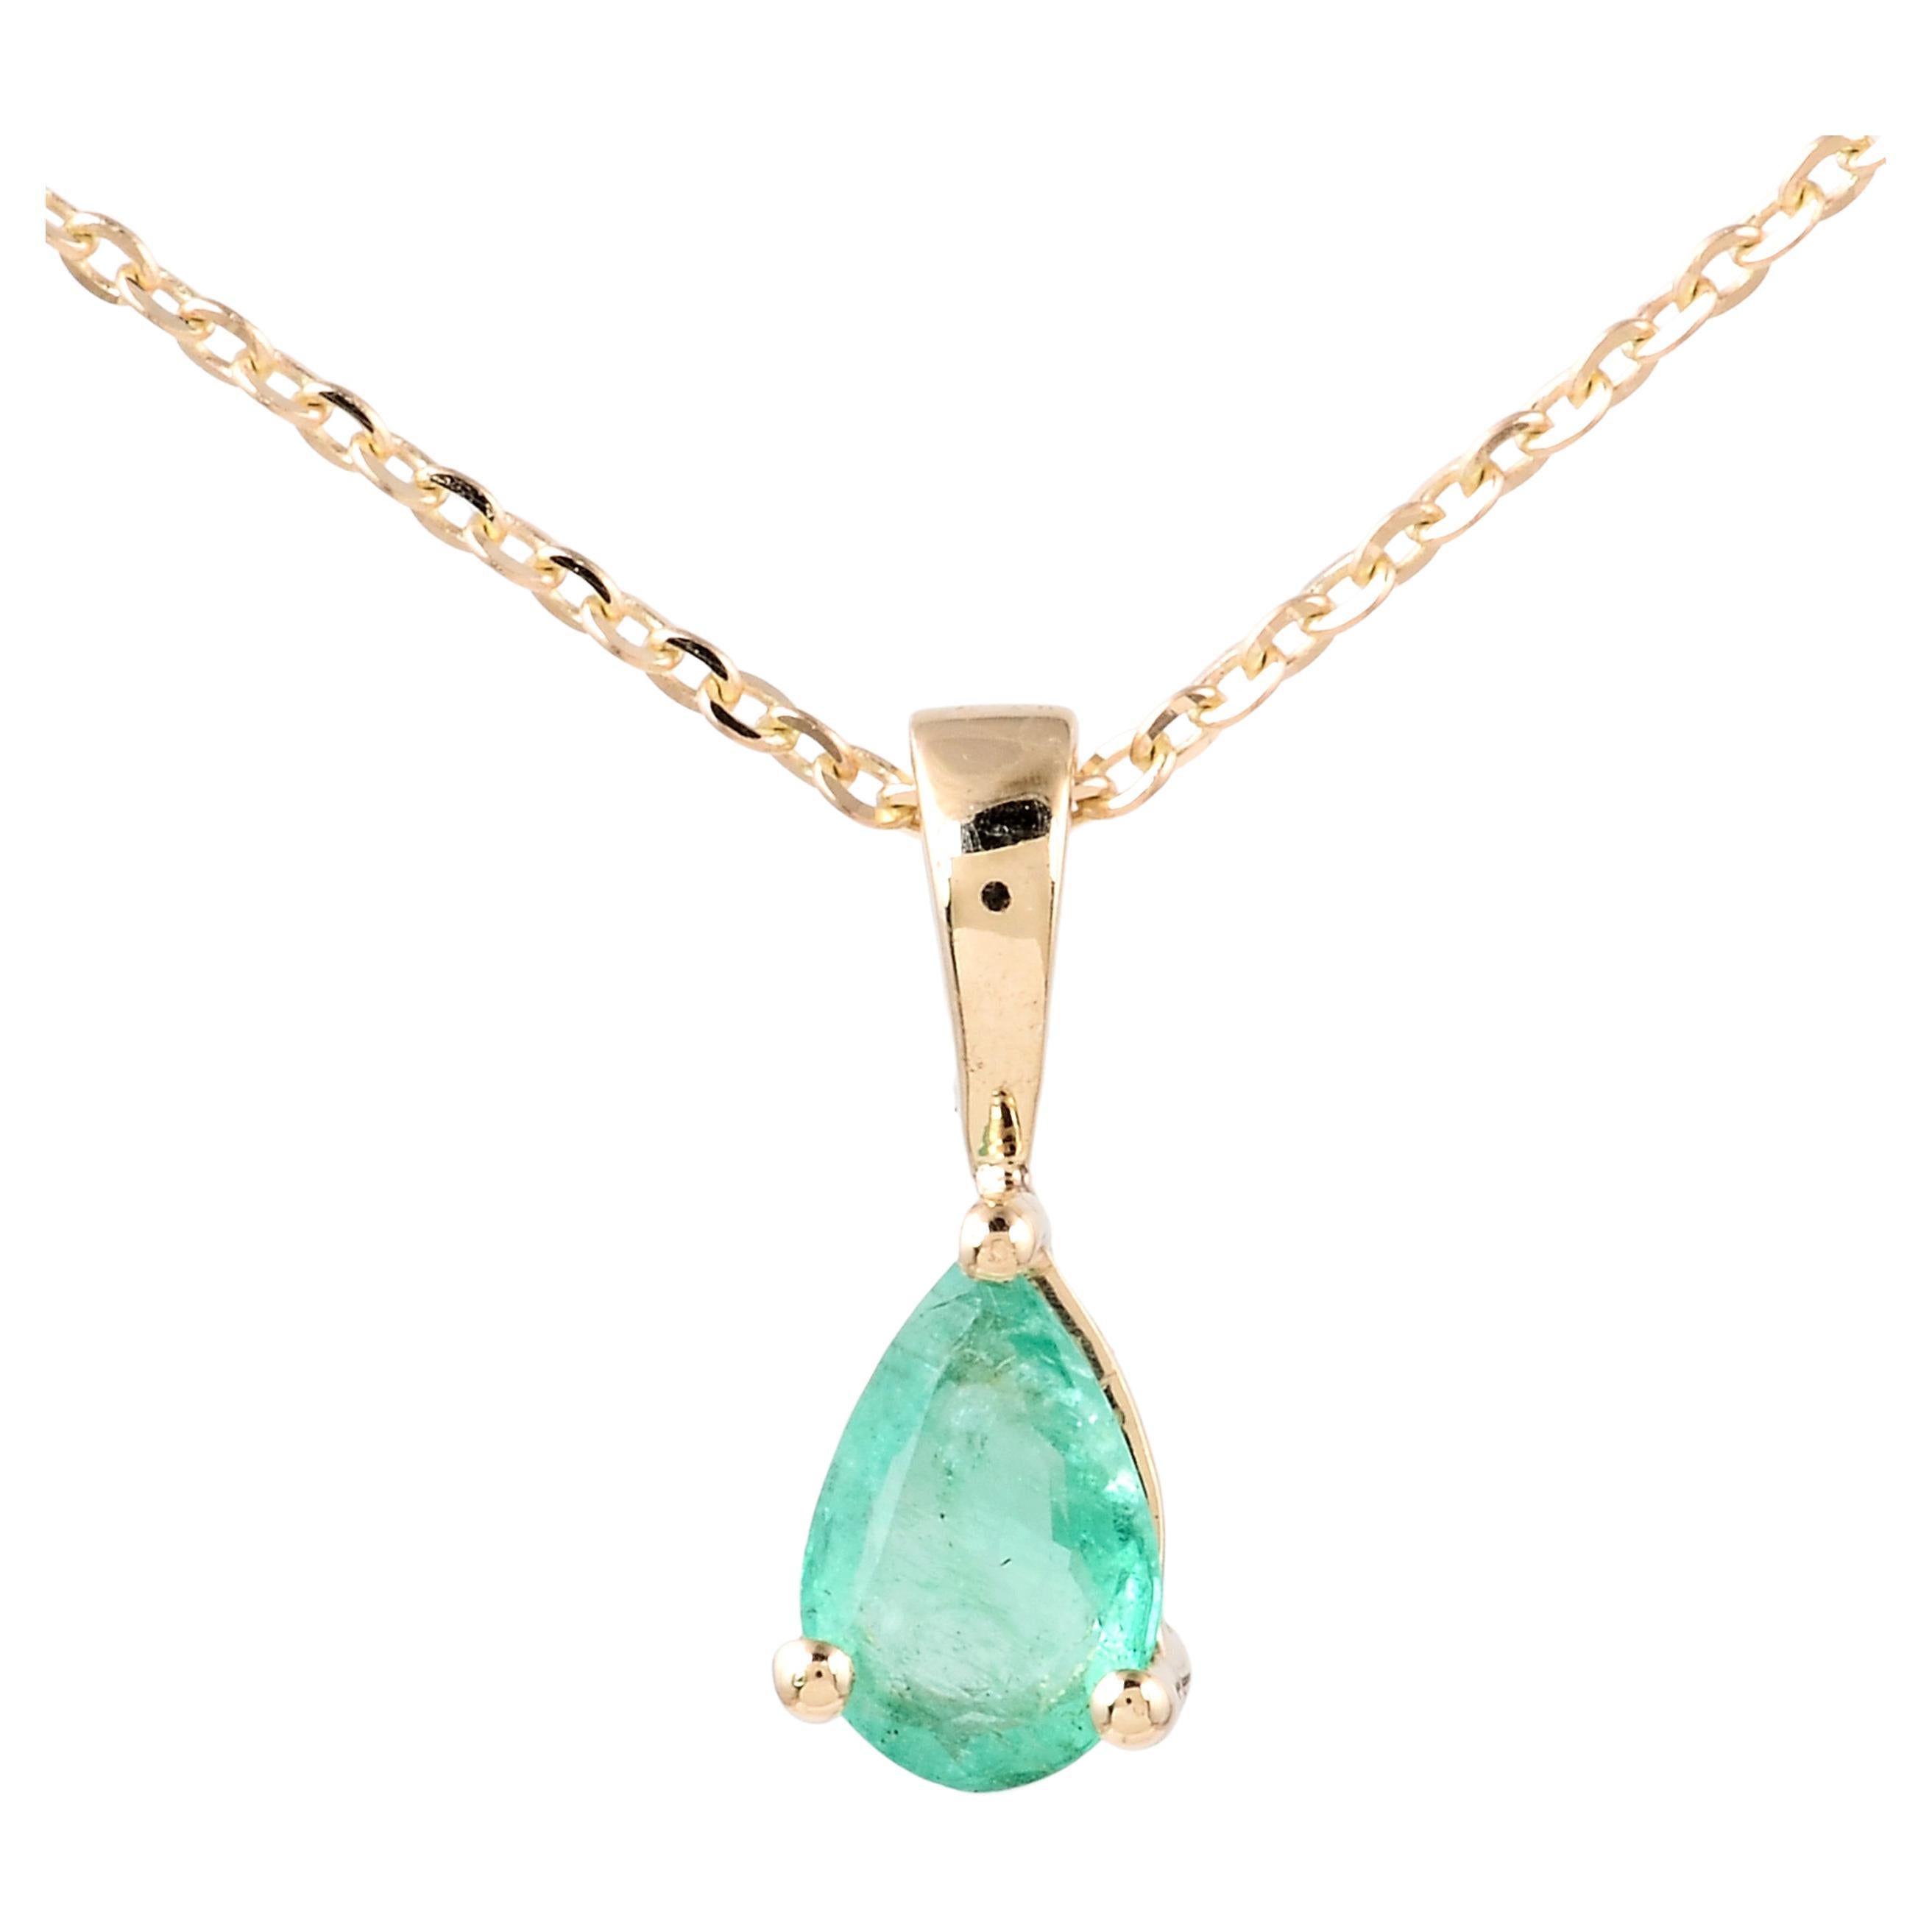 Luxury 14K Emerald Pendant Necklace  Exquisite Jewelry for Timeless Elegance